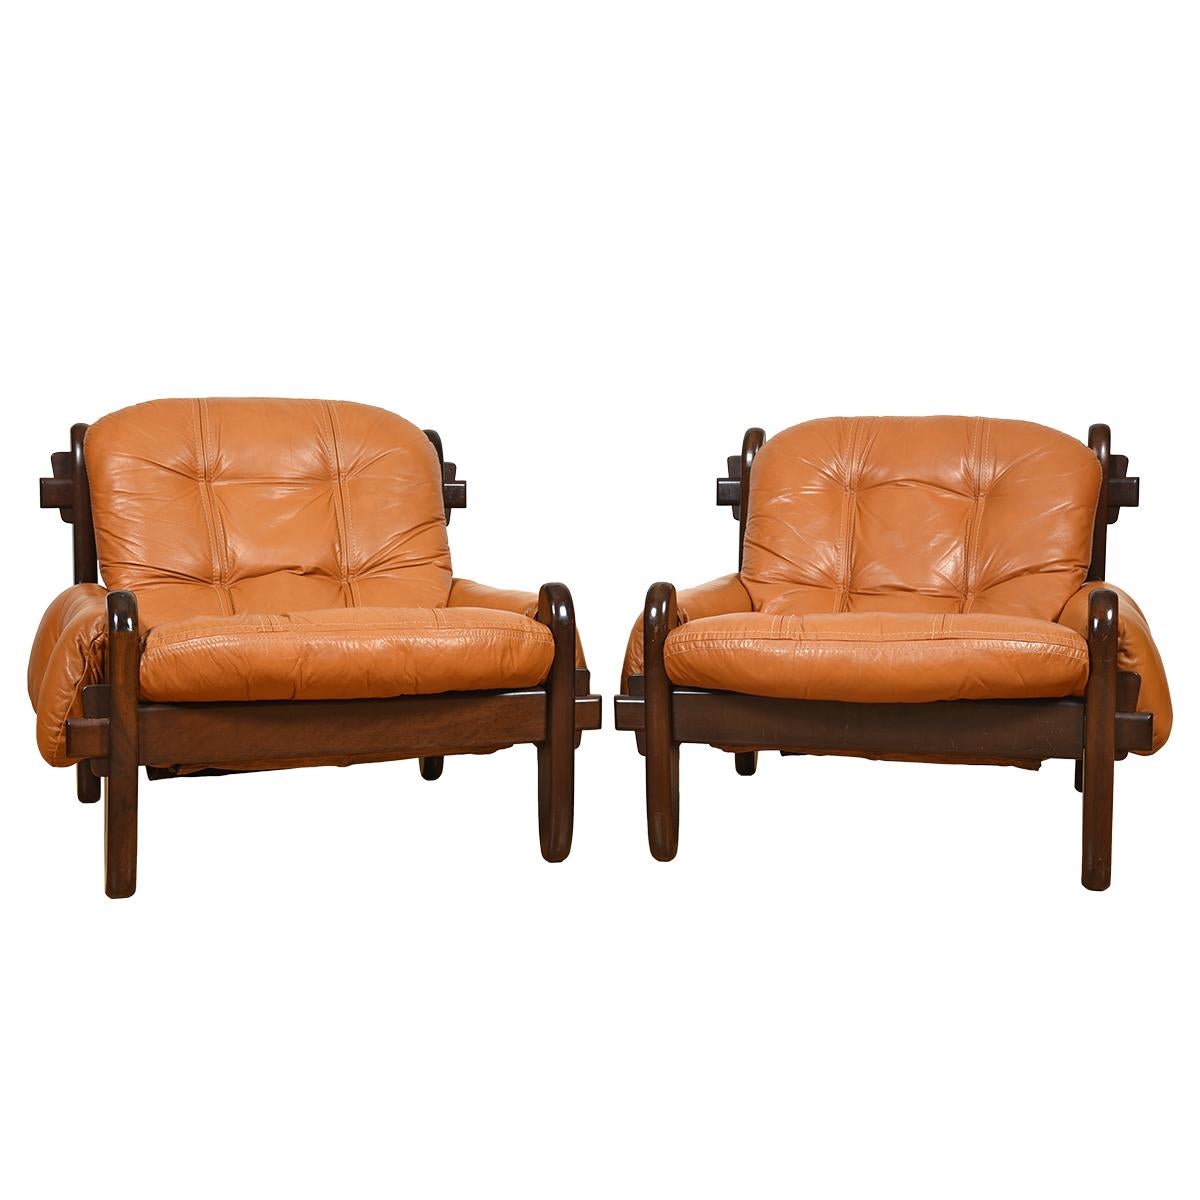 Mid Century Modern as only the Brazilian designers do it!
Rosewood frame with plush tufted leather cushions.
Set includes a sofa and two lounge chairs.



*Due to time, labor costs, and heightened restrictions on Brazilian rosewood, we are not